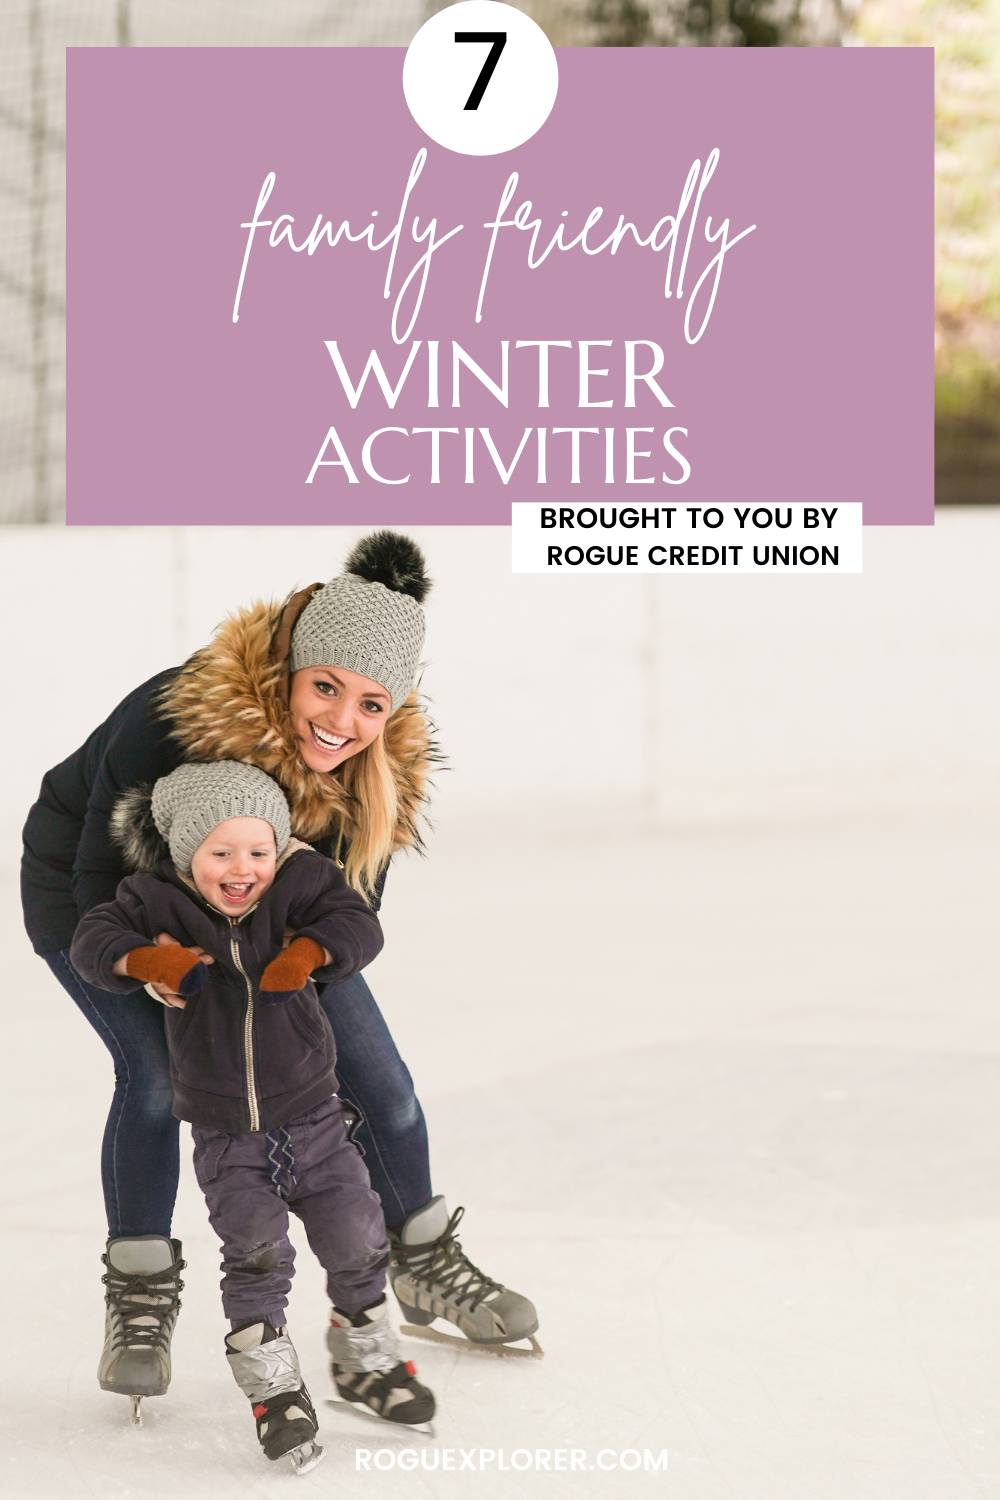 7 Family Friendly Winter Activities in Southern Oregon